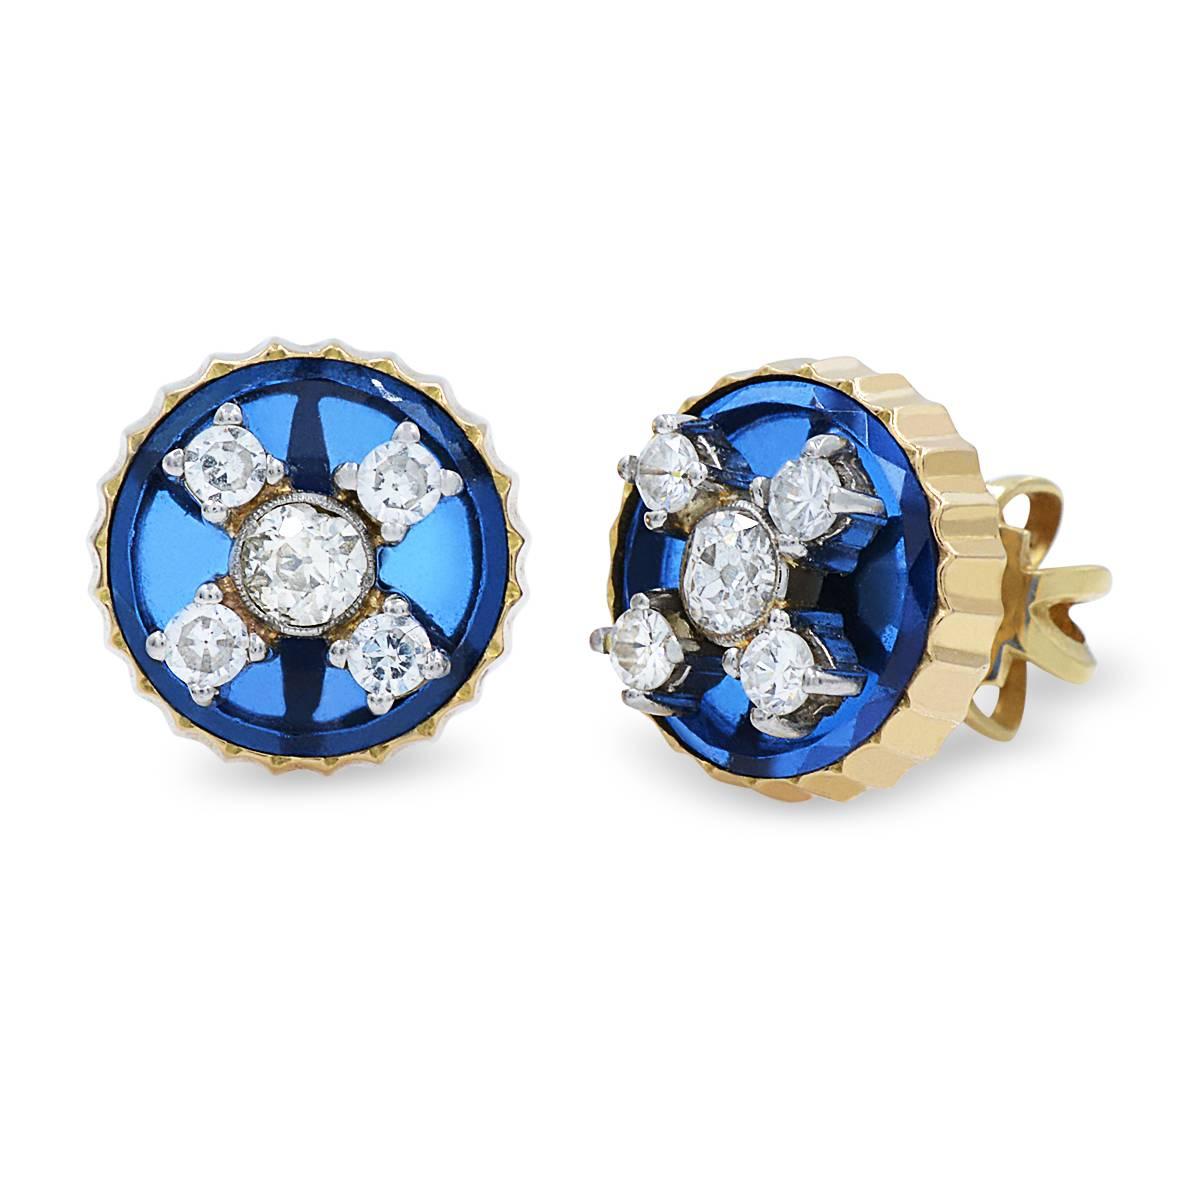 Ladies diamond stud earrings crafted in yellow gold and platinum. Set with old euro and old mine diamonds. 

Earring width: 14mm
Diamond Carat Weight: 1.05cts (approx.)
Backing: Push Backs 


